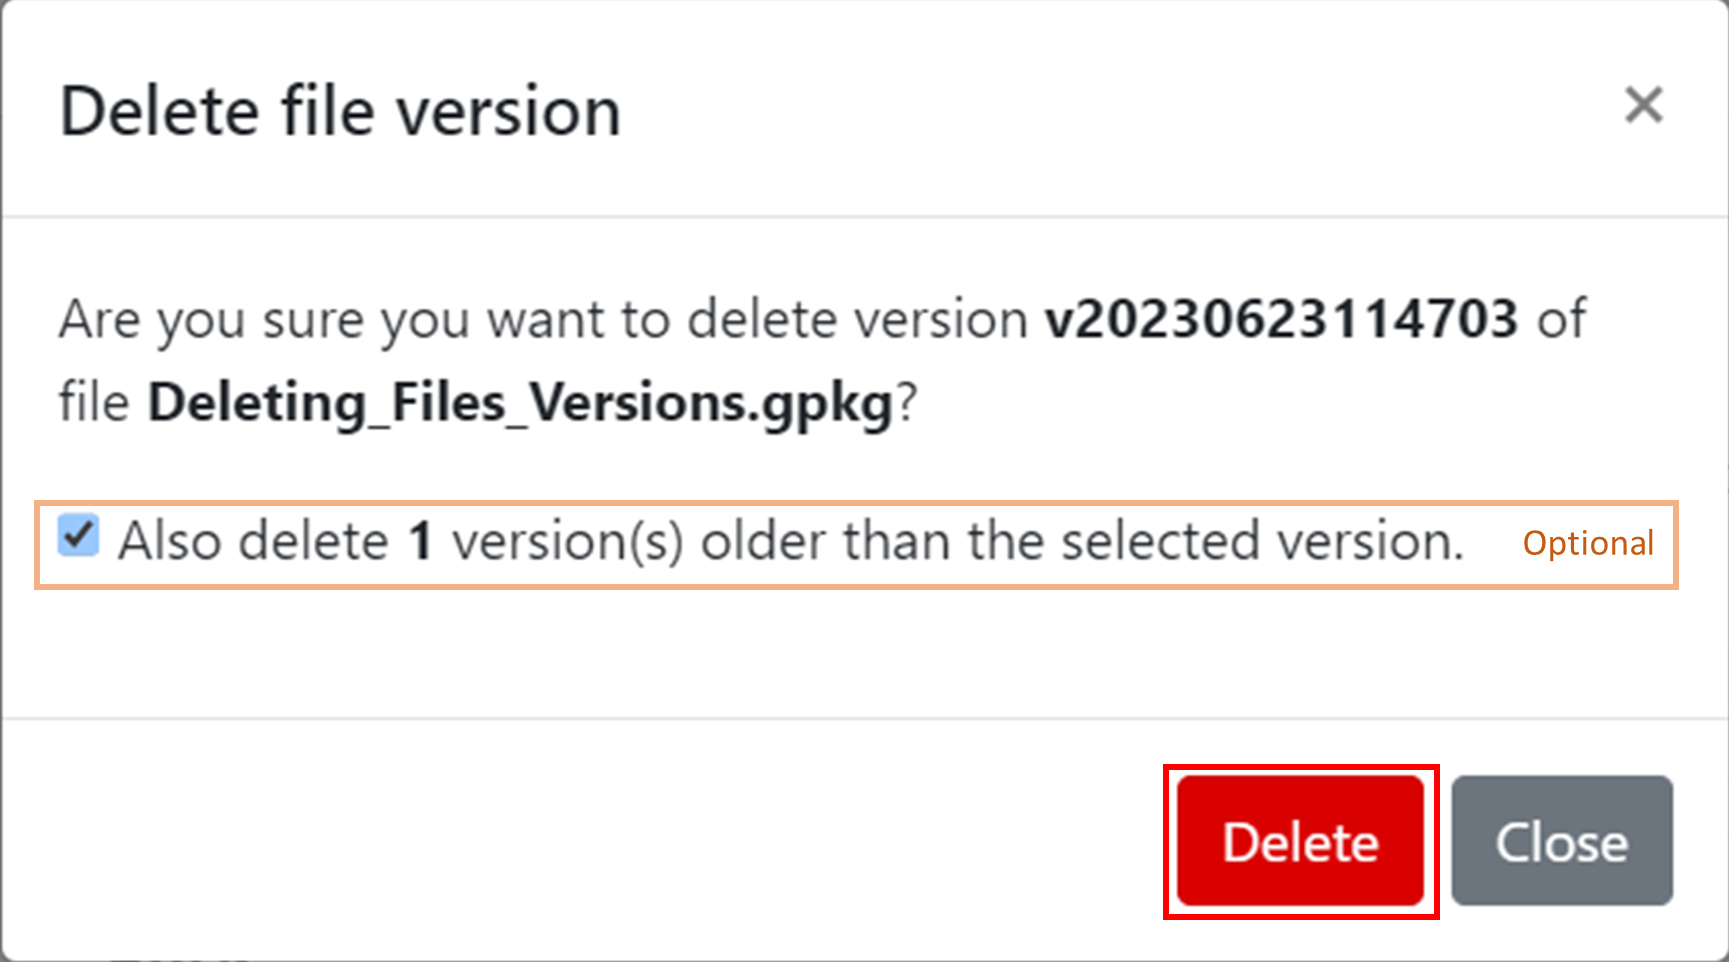 Deleting files versions